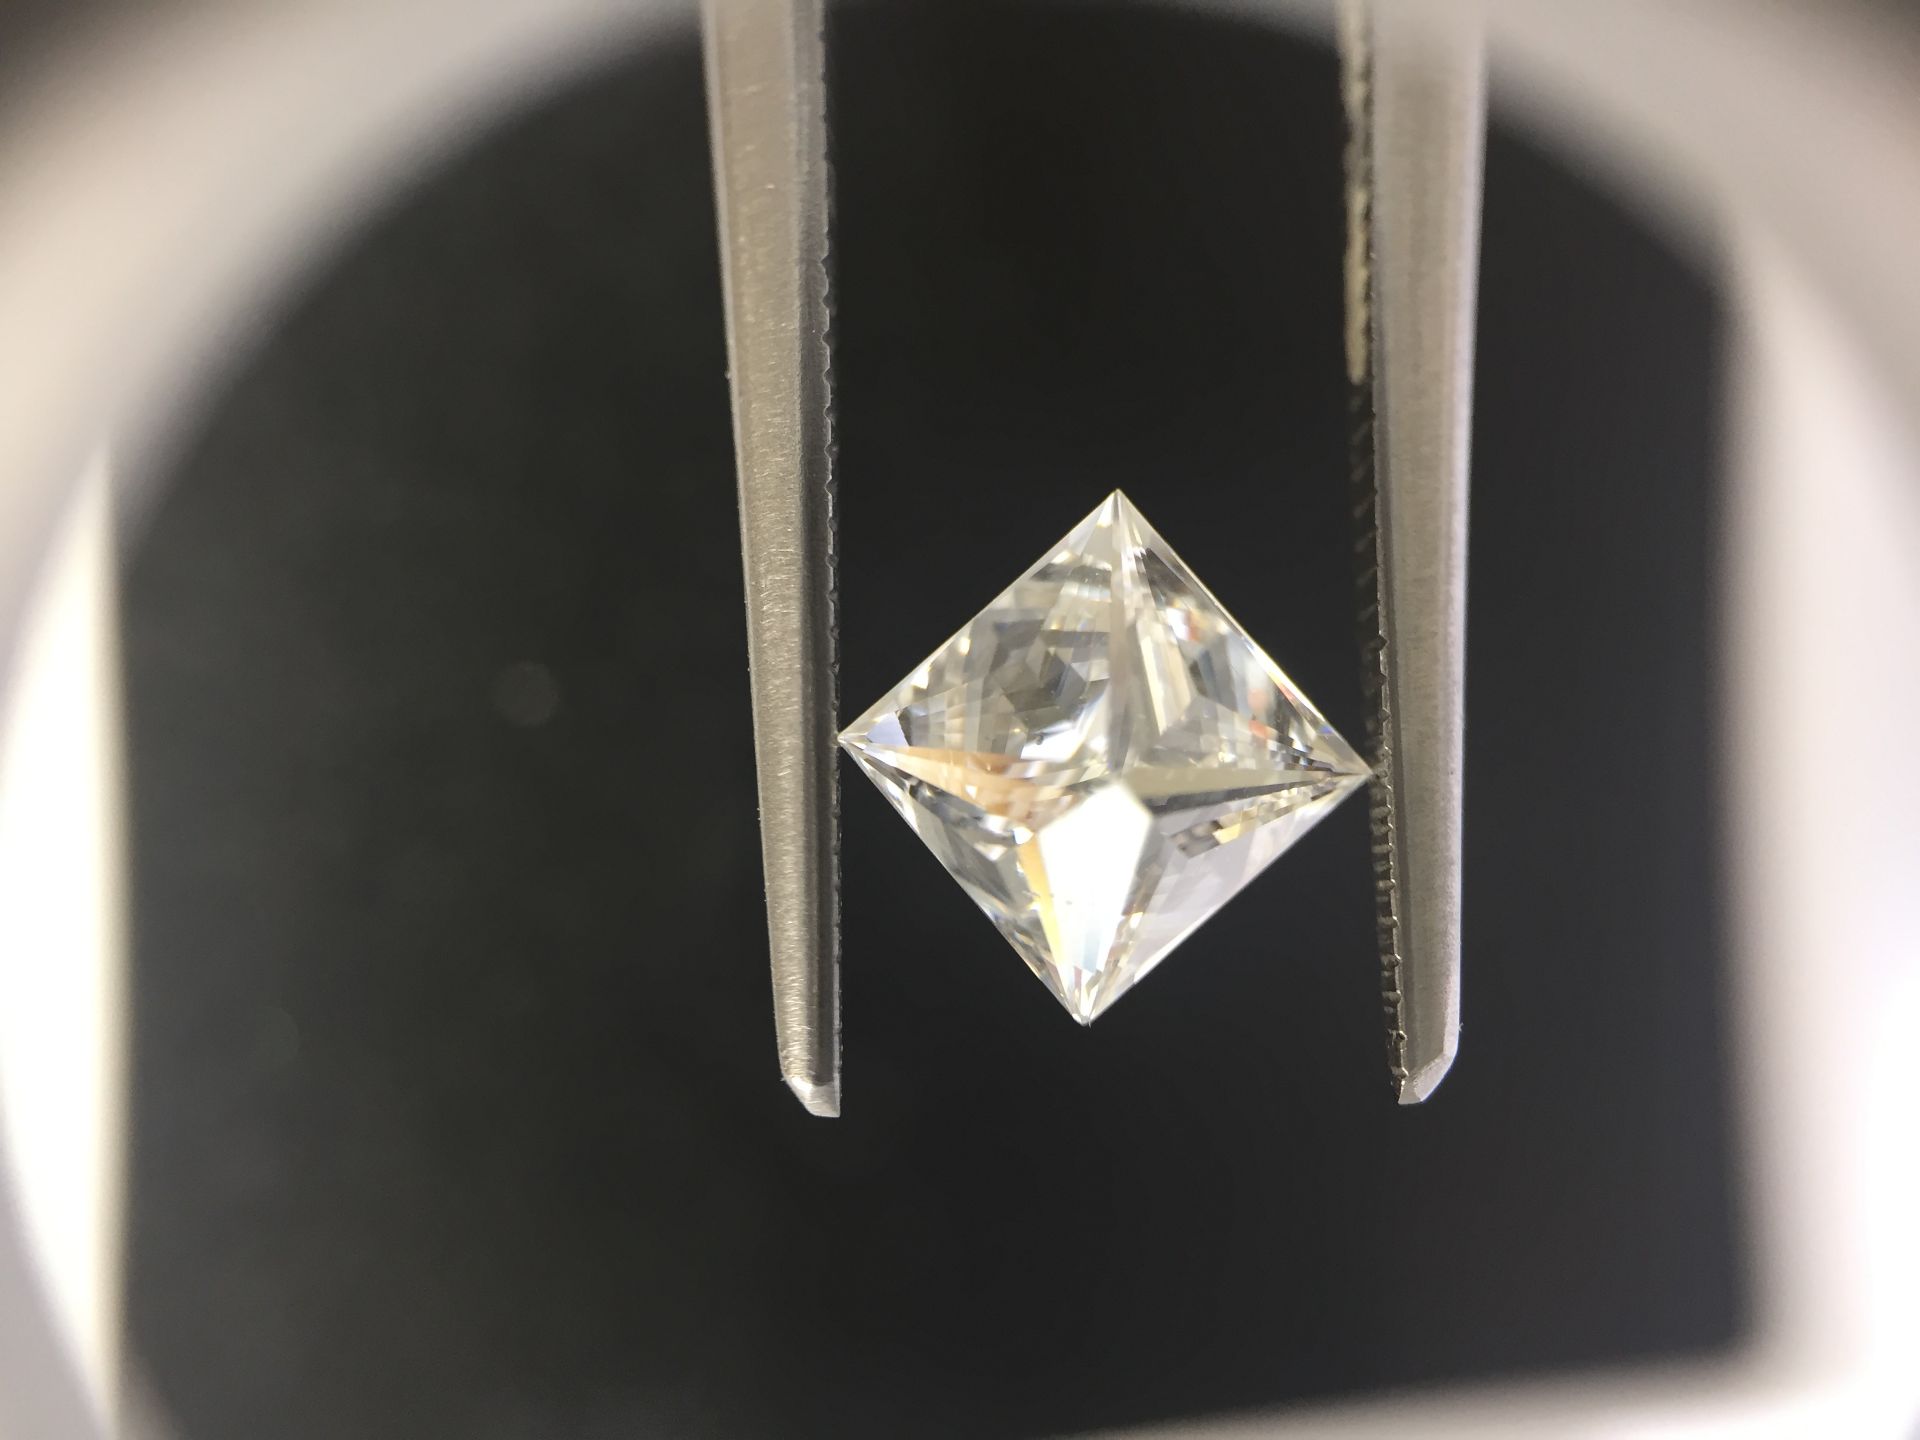 0.96ct princess cut diamond. F colour, SI1 clarity. No certification. Can be used for ring or - Image 2 of 4